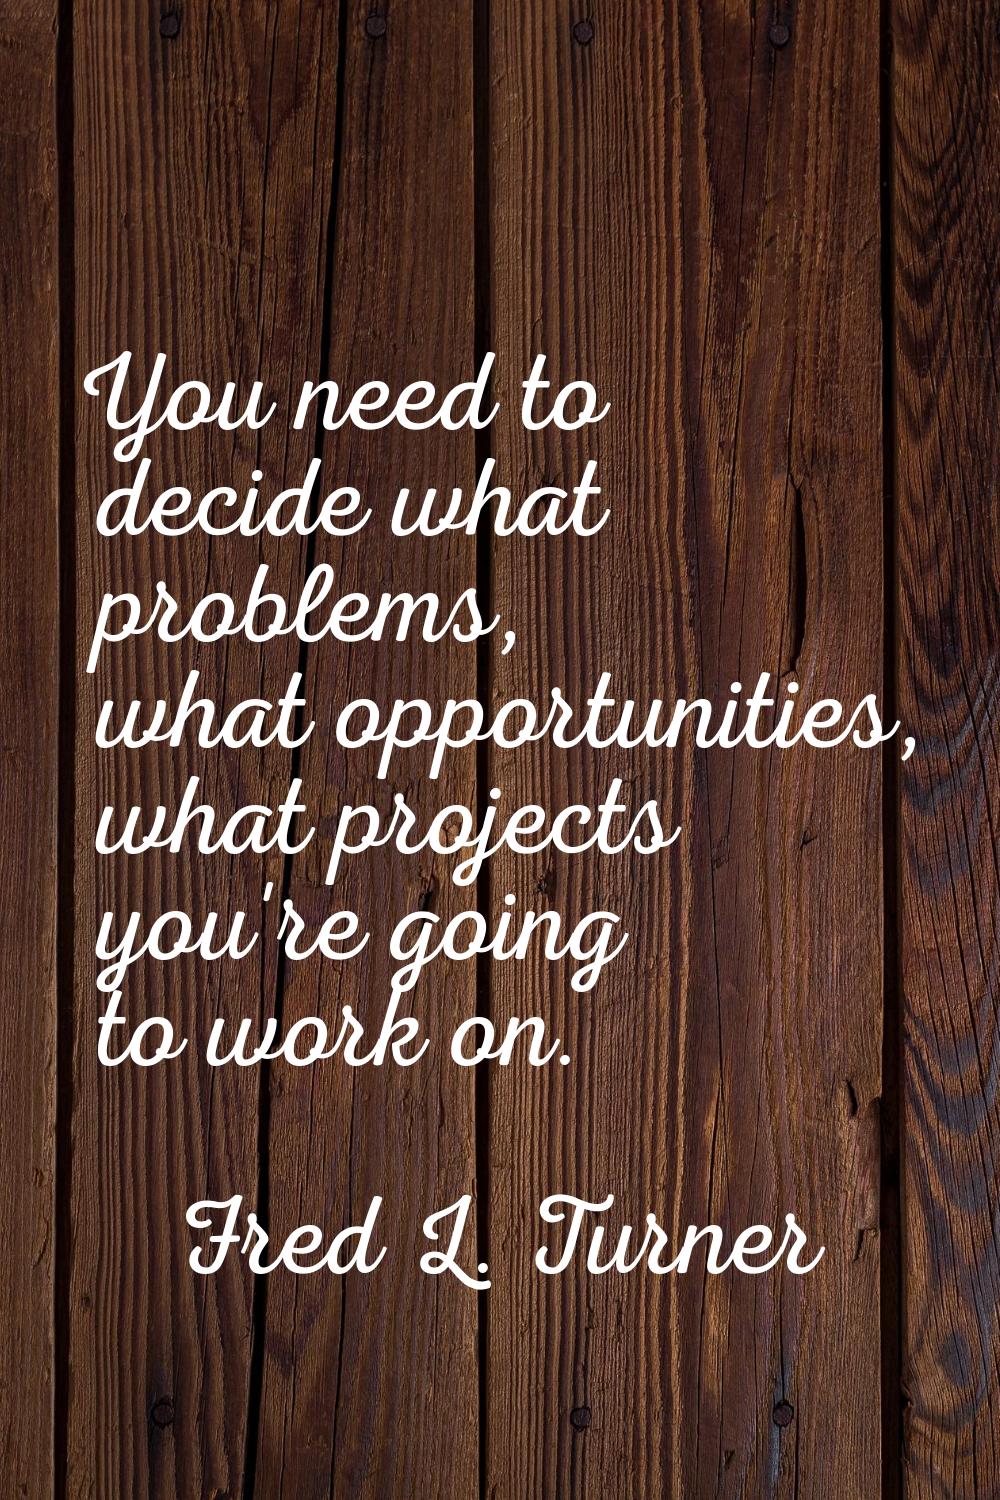 You need to decide what problems, what opportunities, what projects you're going to work on.